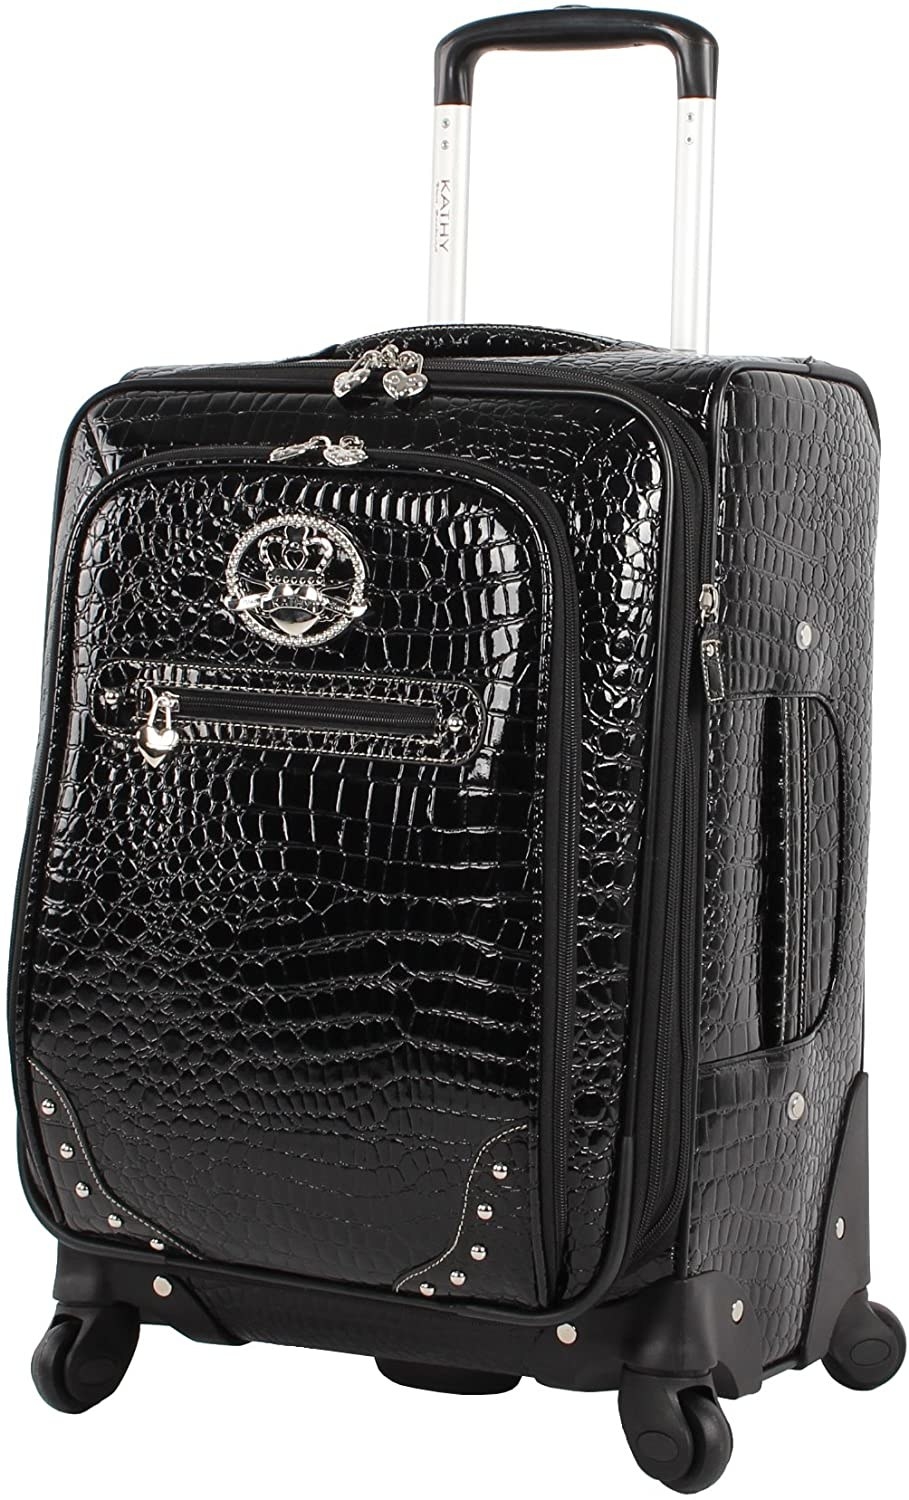 An image of a black faux croc suitcase with four rolling wheels